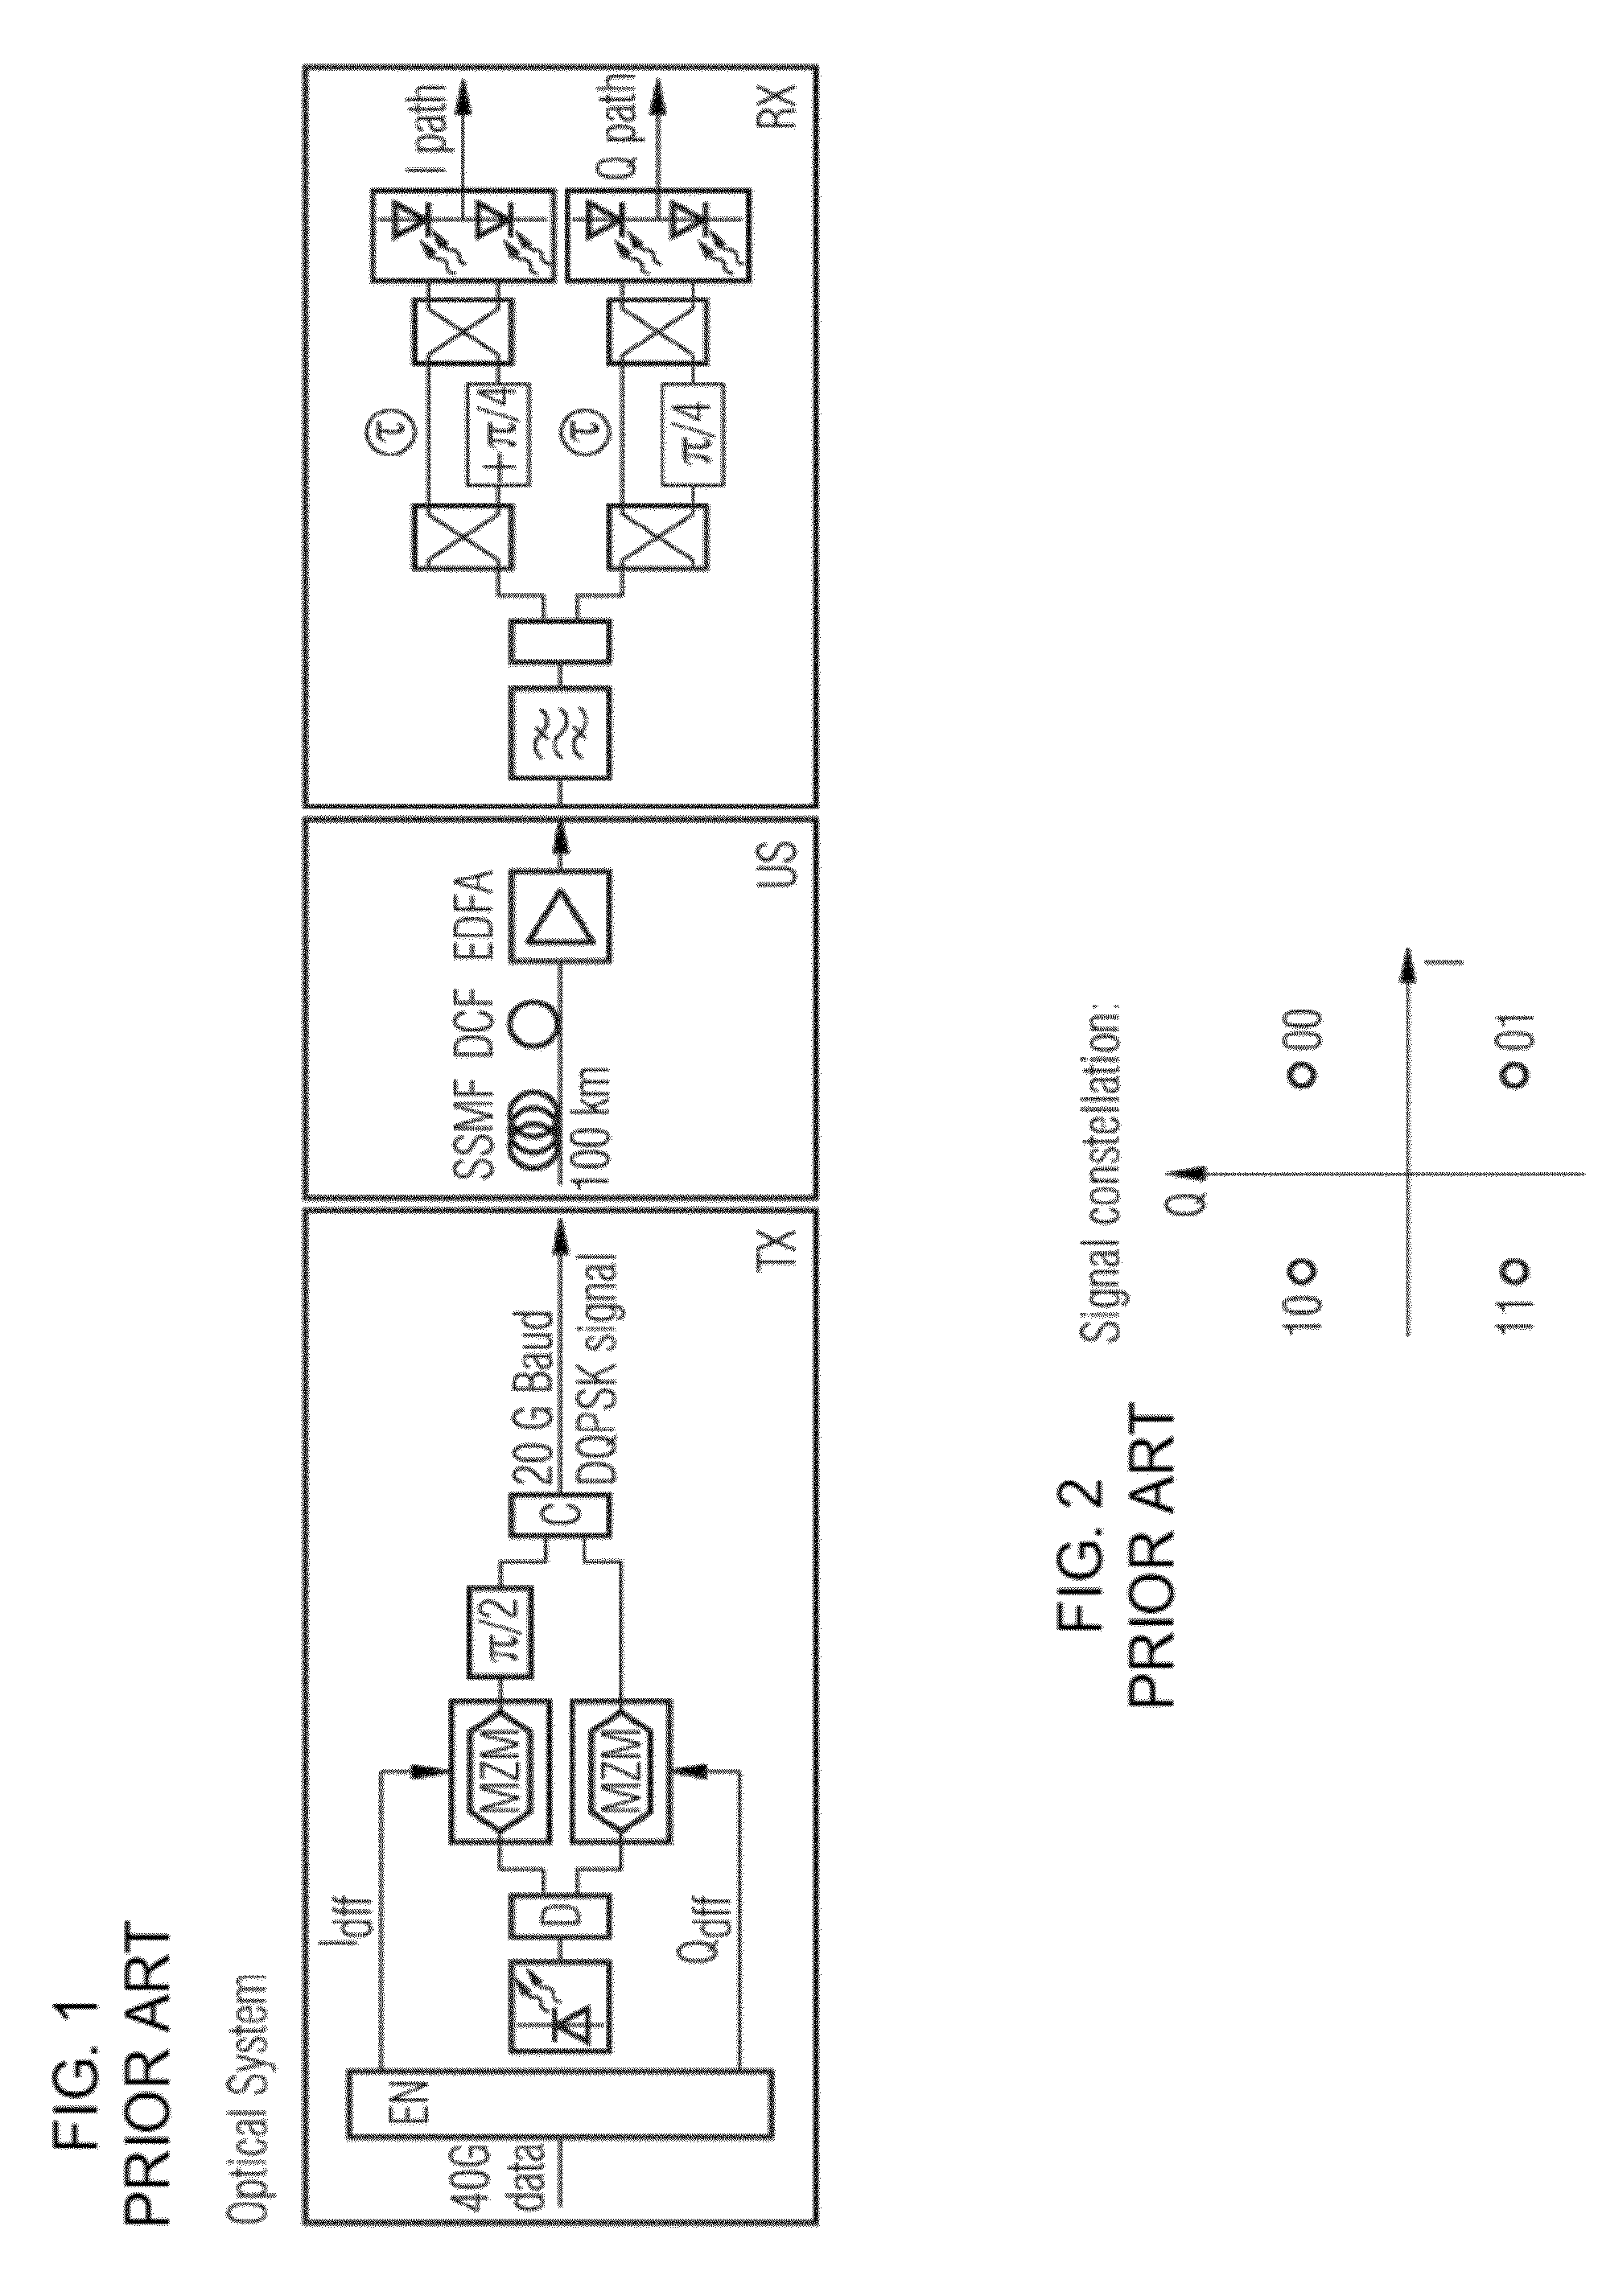 Receiver structure and method for the demodulation of a quadrature-modulated signal